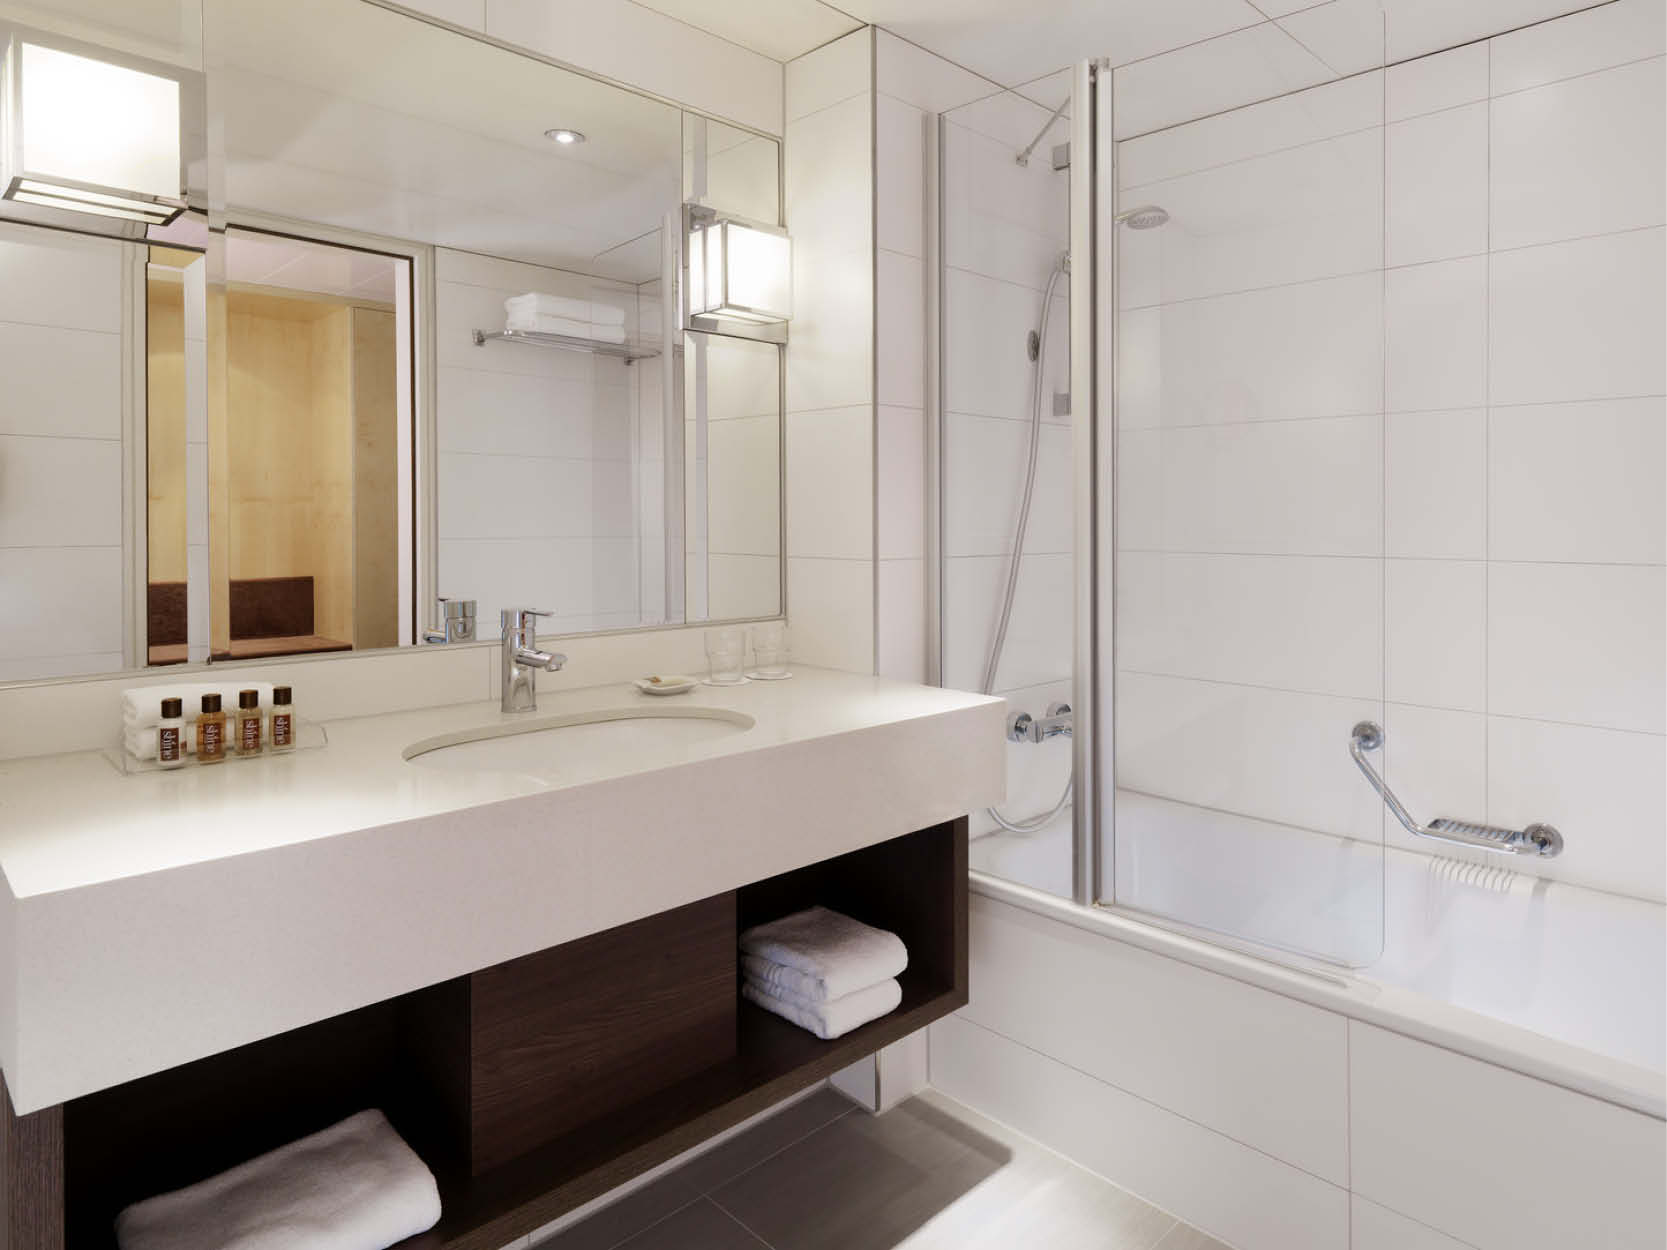 bathroom - hotel sheraton airport and conference ctr - frankfurt, germany